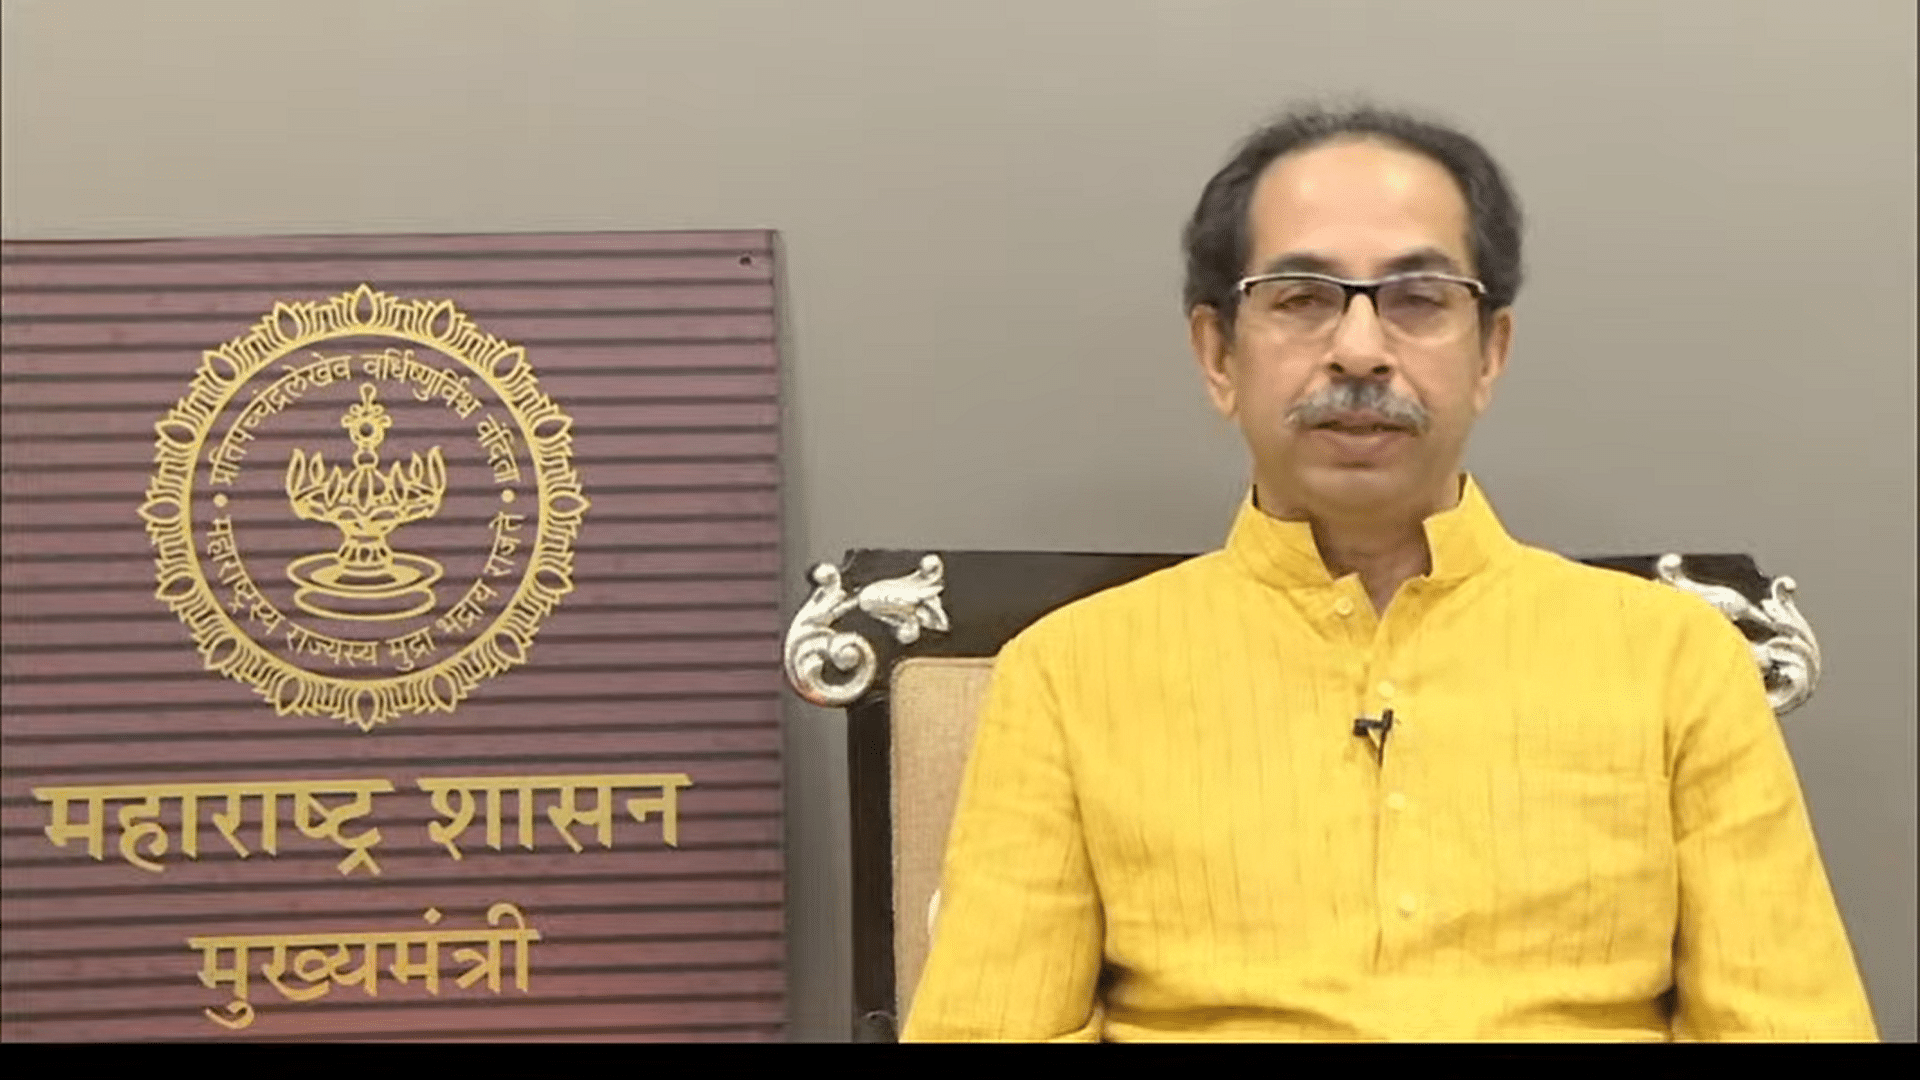 <div class="paragraphs"><p>Maharashtra Chief Minister Uddhav Thackeray&nbsp;announced the reopening of all places of worship from 7 October, the first day of the Navratri festival.</p><p>(File Photo)</p></div>